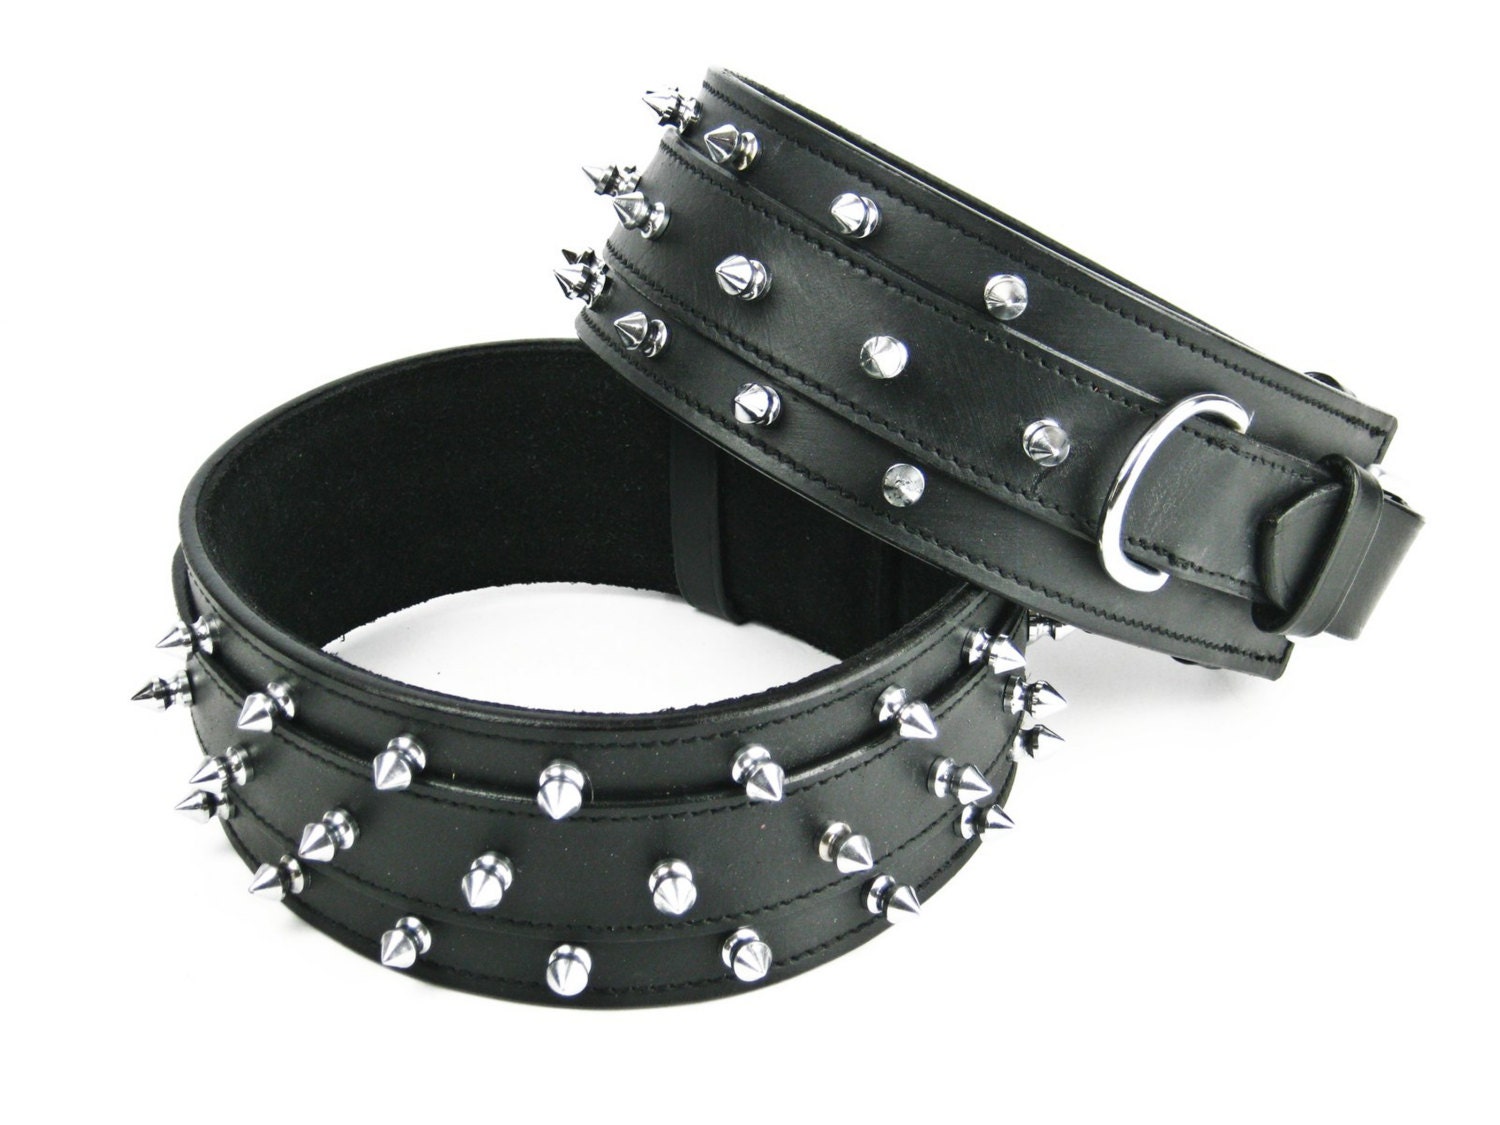 Spiked Leather Dog Collar Handmade Strong Soft Padded 2.5